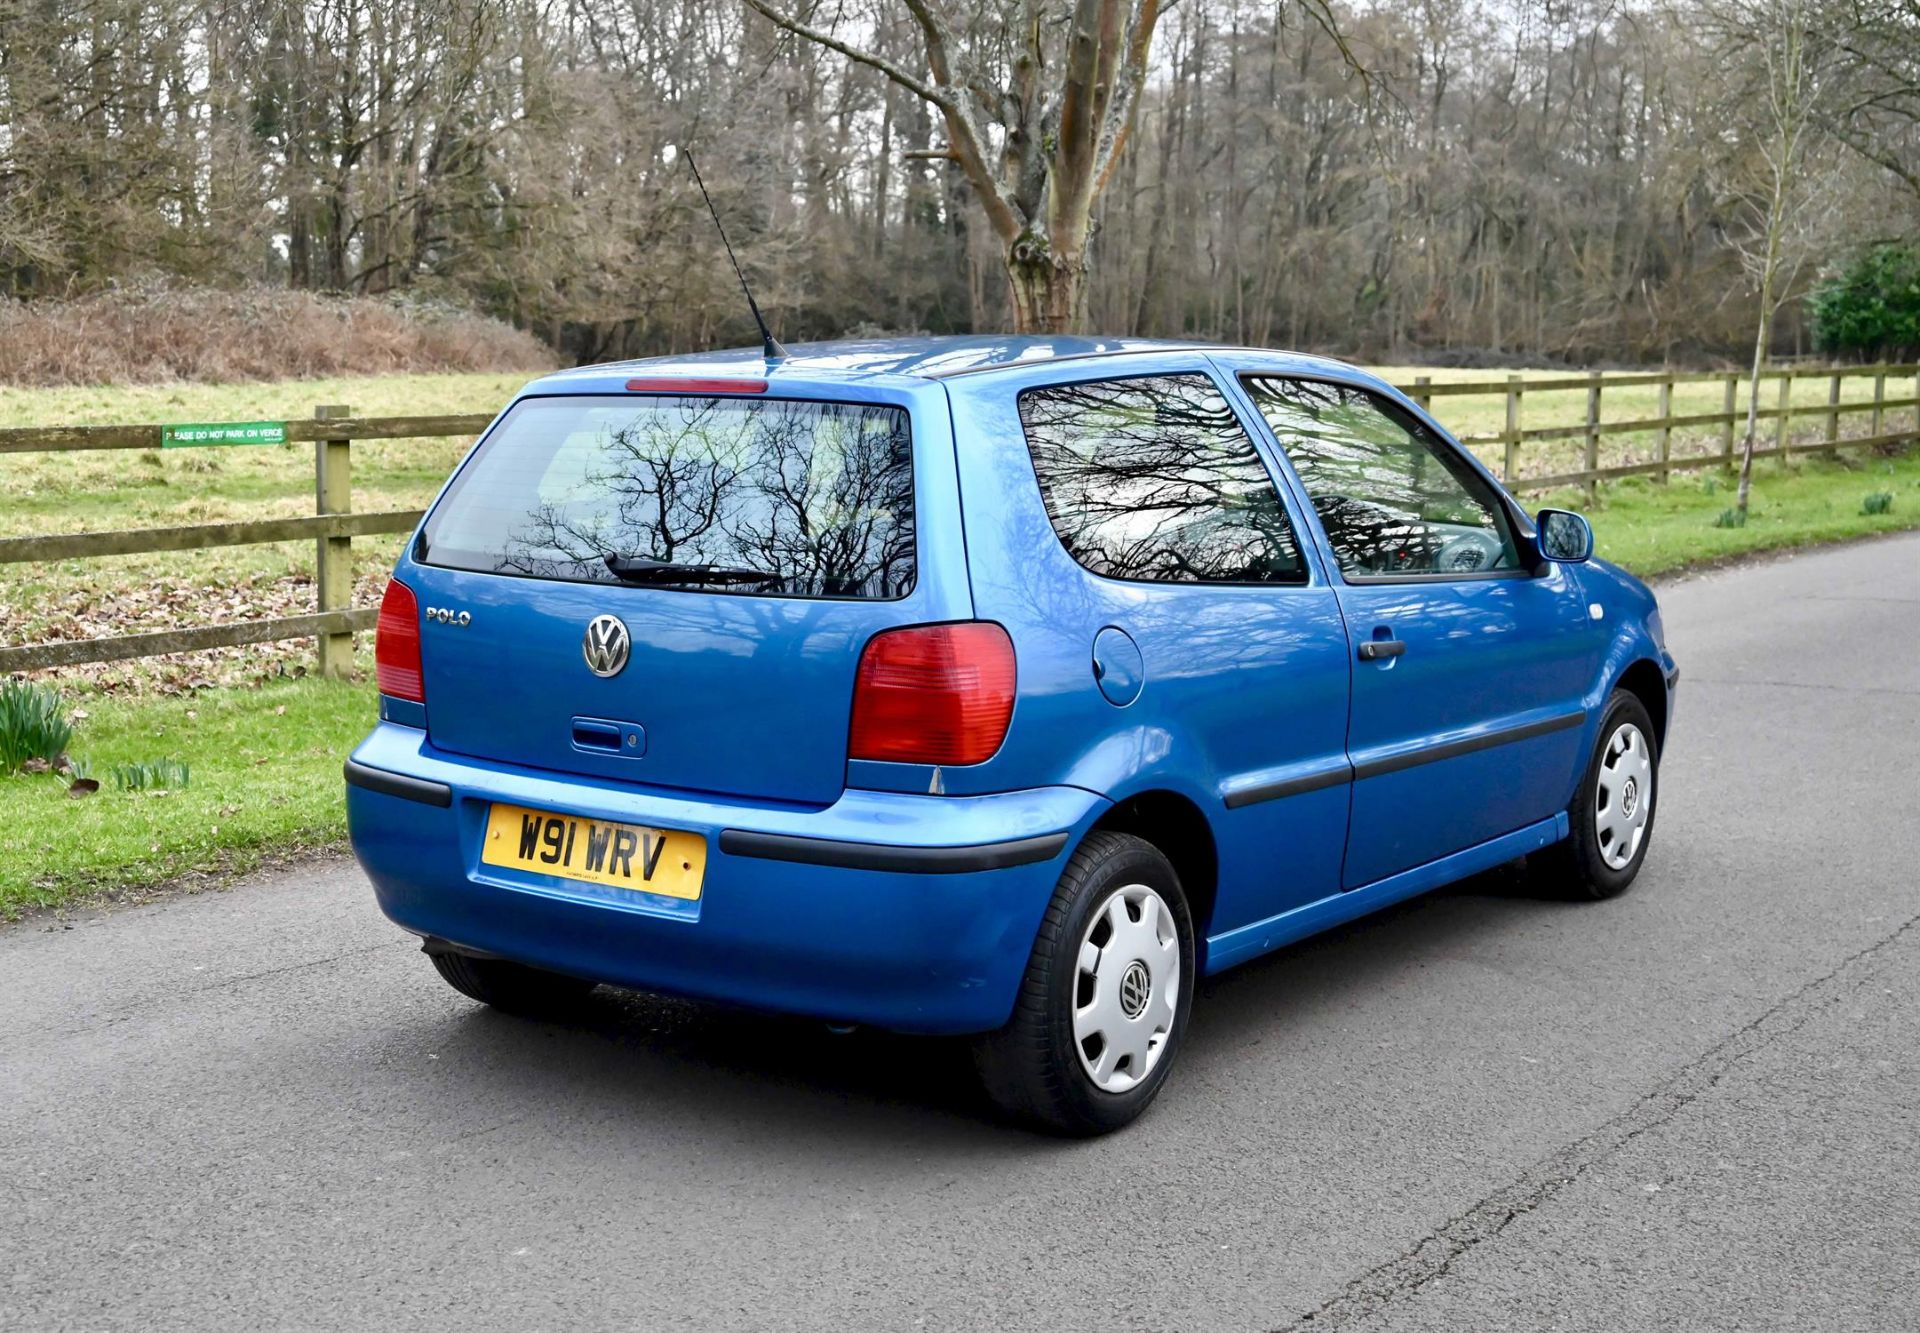 2000 VW Polo 1.4 E 3-door hatchback. Registration number W91 WRV. Petrol, 5-Speed Manual gearbox. - Image 3 of 9